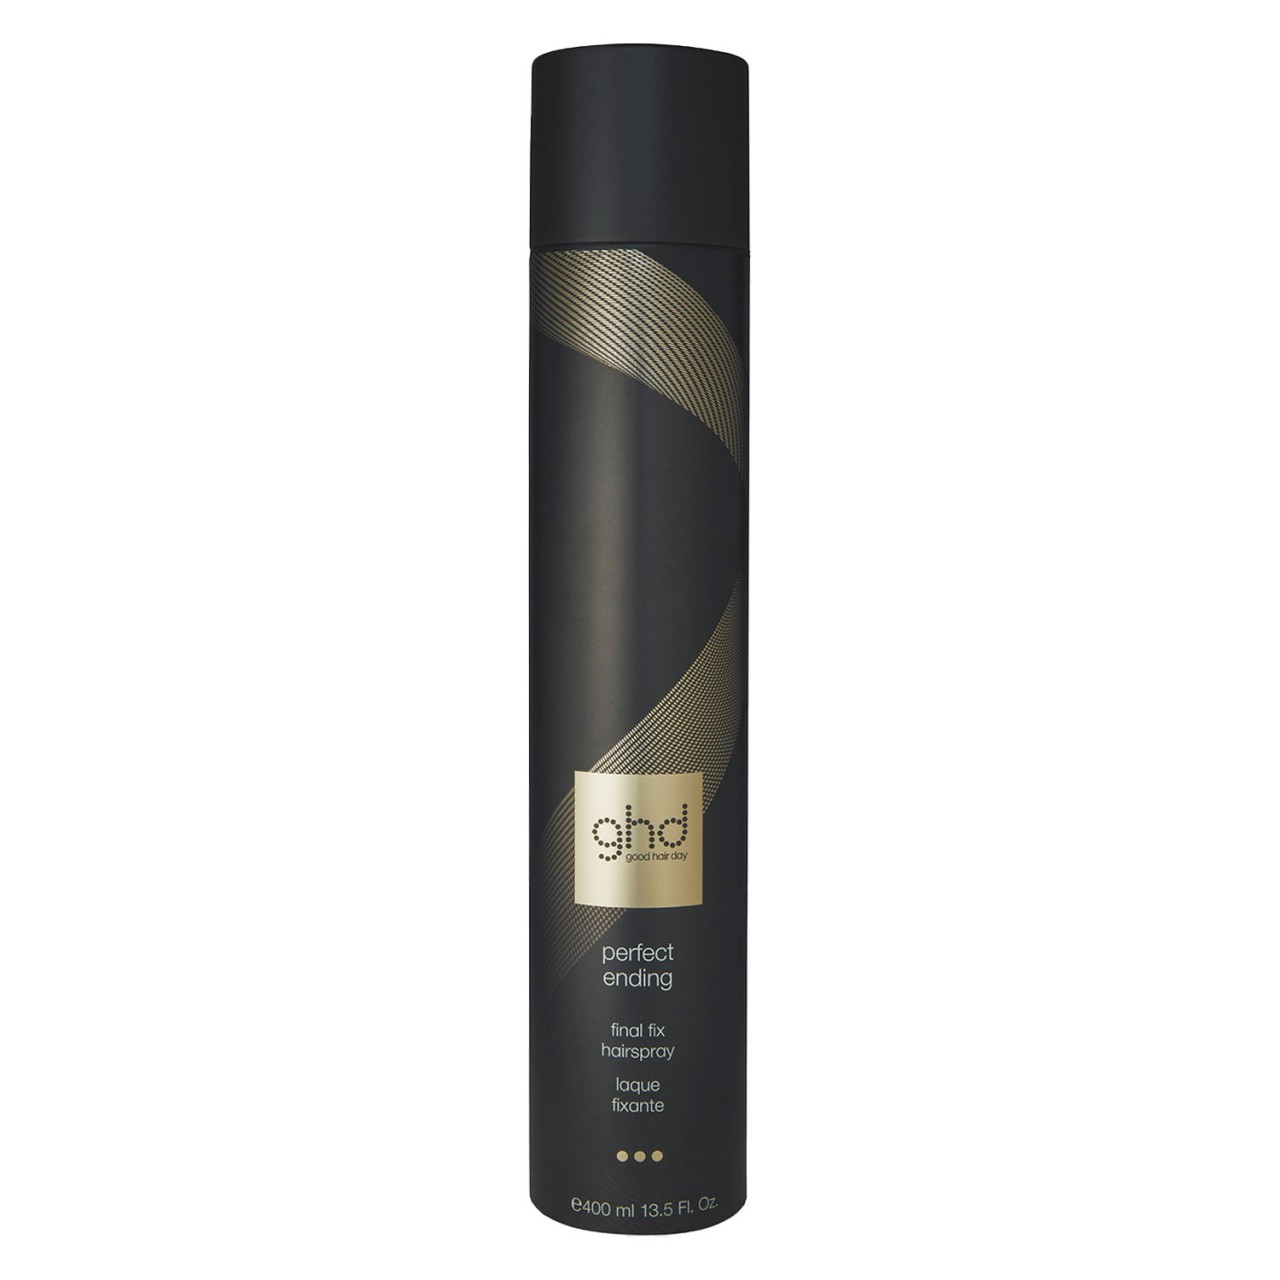 ghd Heat Protection Styling System - Perfect Ending Final Fix Hairspray von ghd